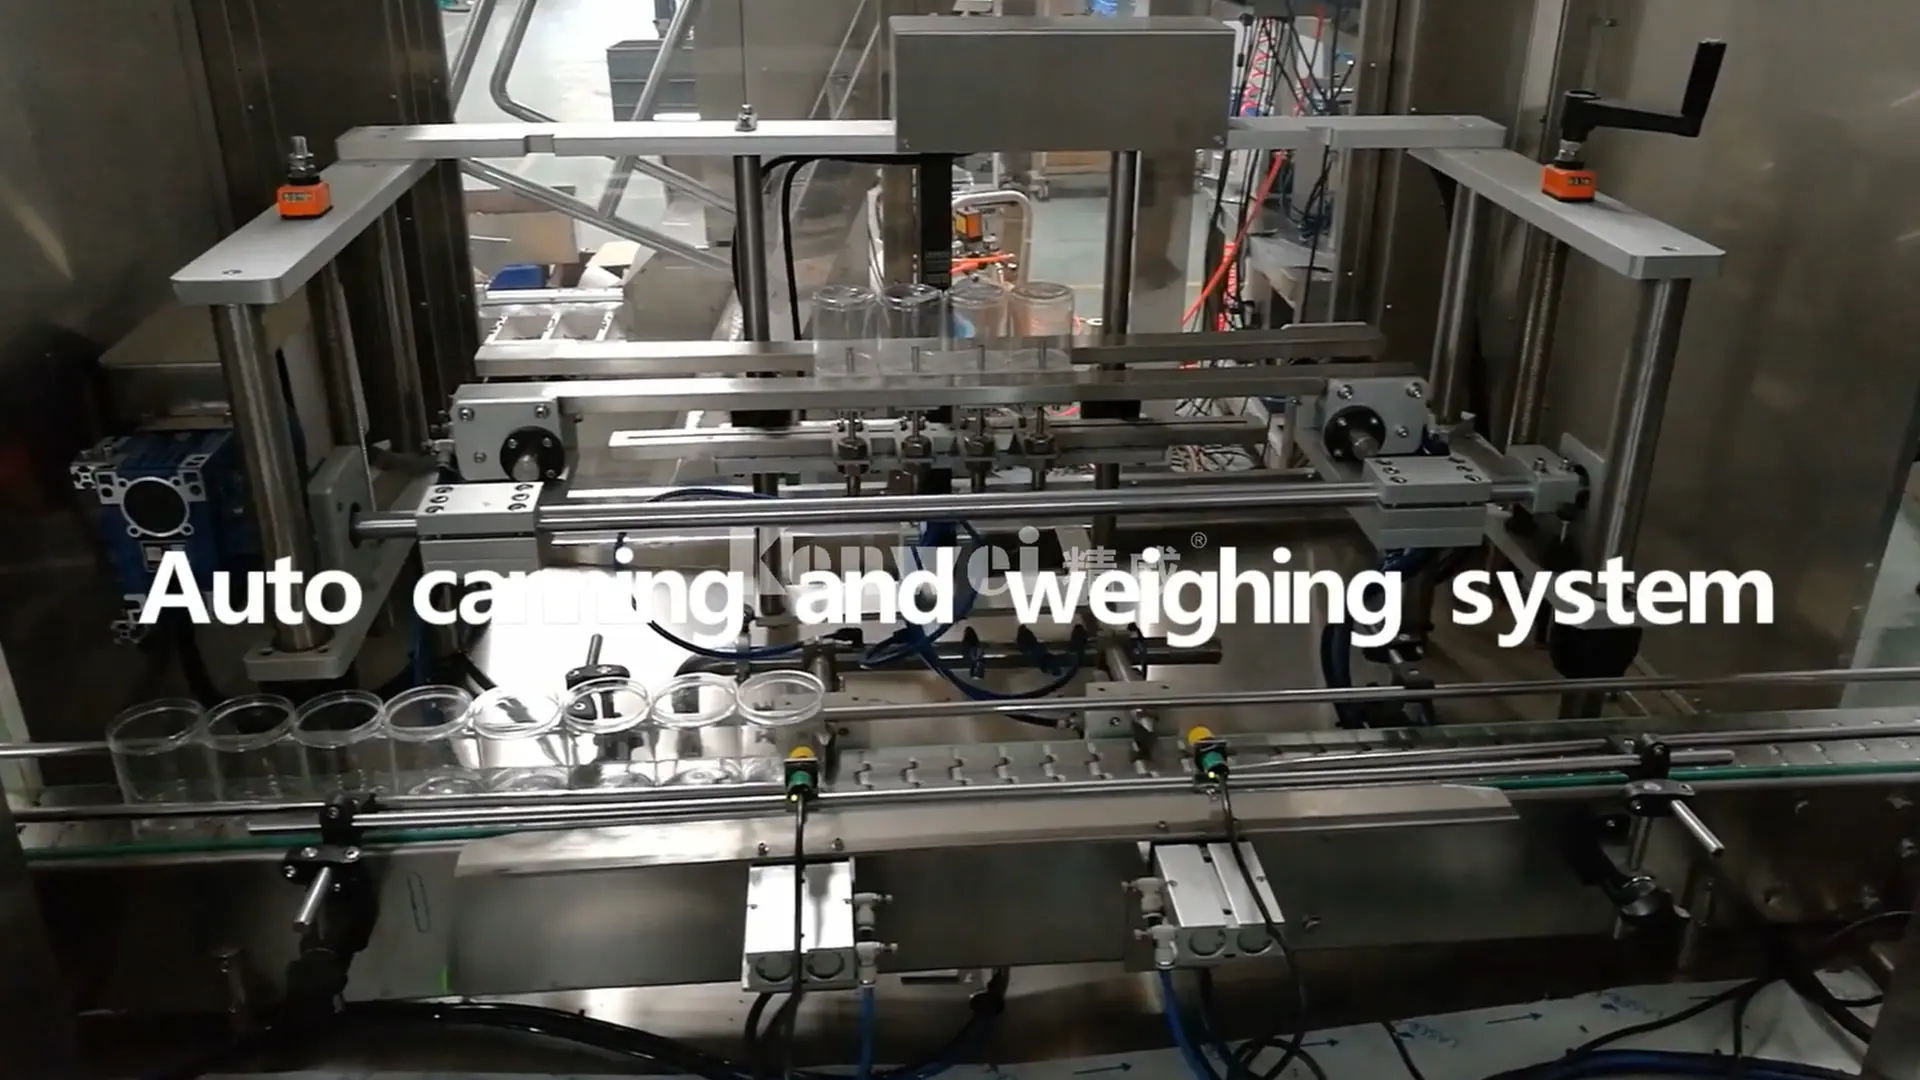 Auto canning and weighing system